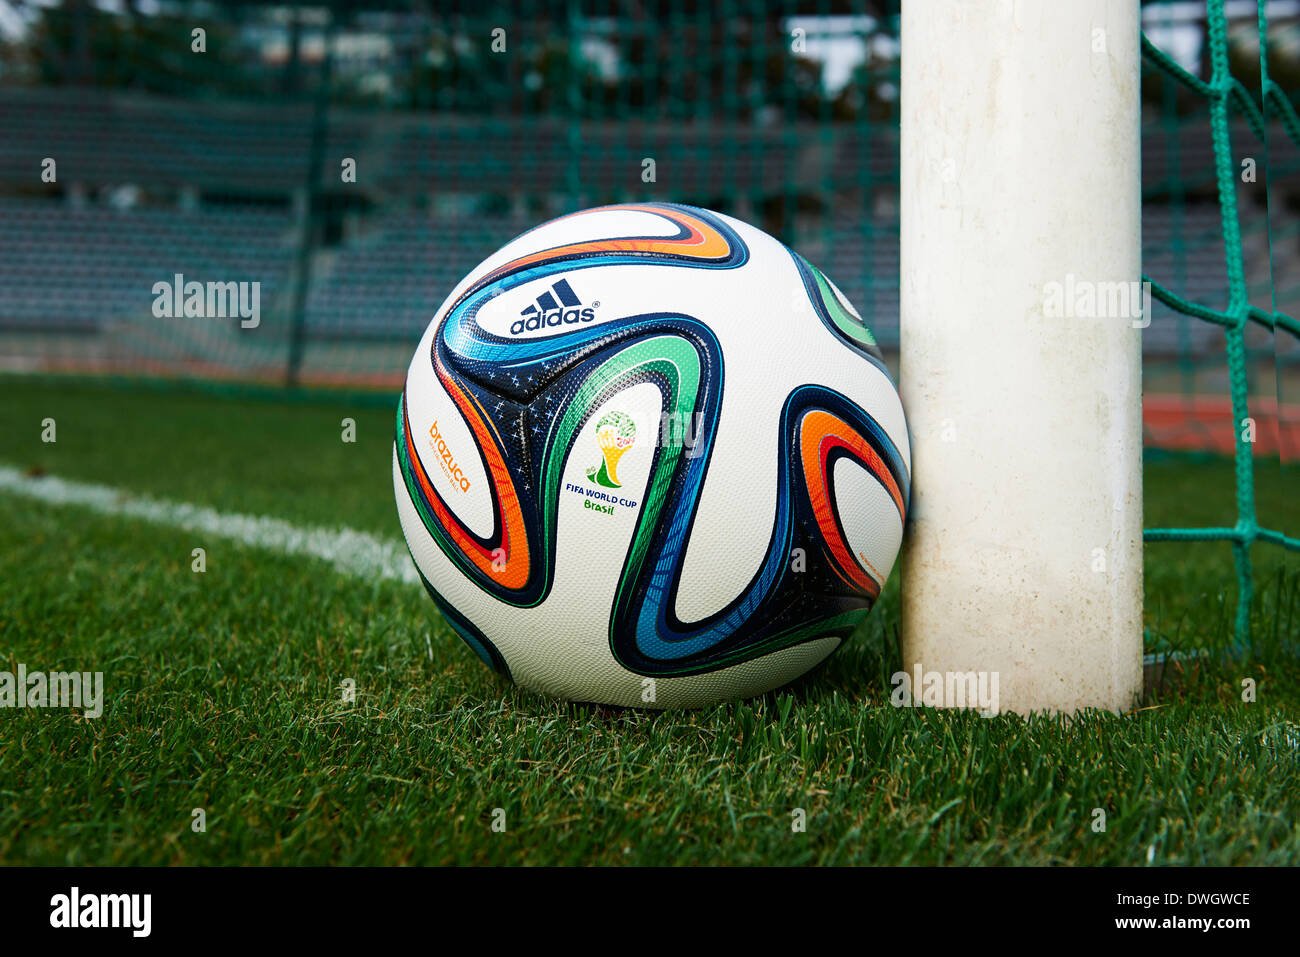 Adidas Brazuca World Cup 2014 Official Matchball Stock Photo